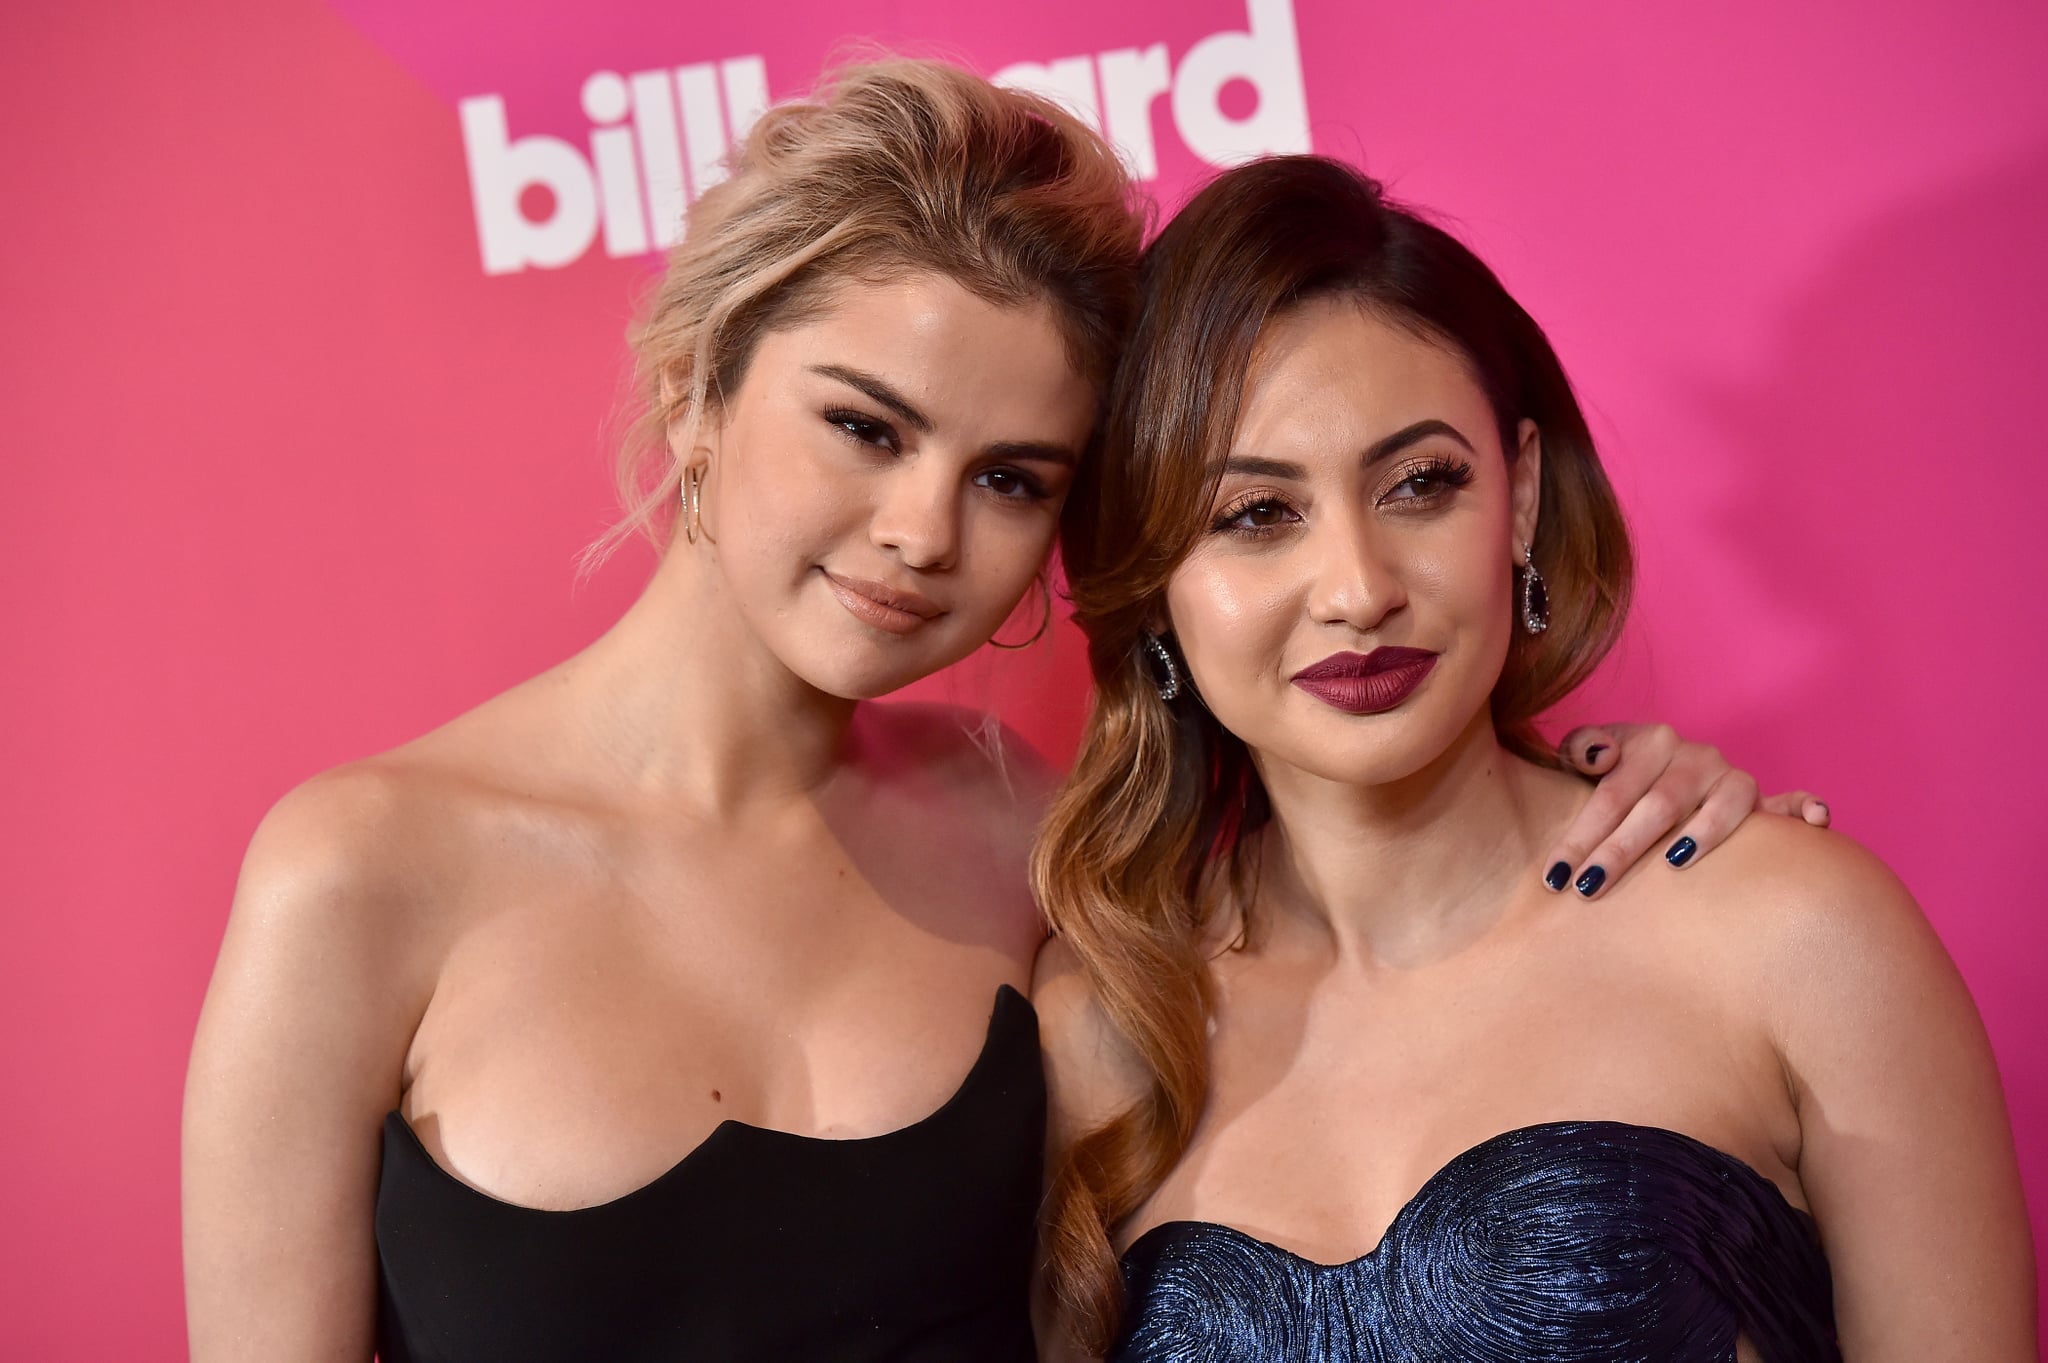 HOLLYWOOD, CA - NOVEMBER 30:  Singer/actress Selena Gomez and actress Francia Raisa arrive at the Billboard Women In Music 2017 at The Ray Dolby Ballroom at Hollywood & Highland Center on November 30, 2017 in Hollywood, California.  (Photo by Axelle/Bauer-Griffin/FilmMagic)